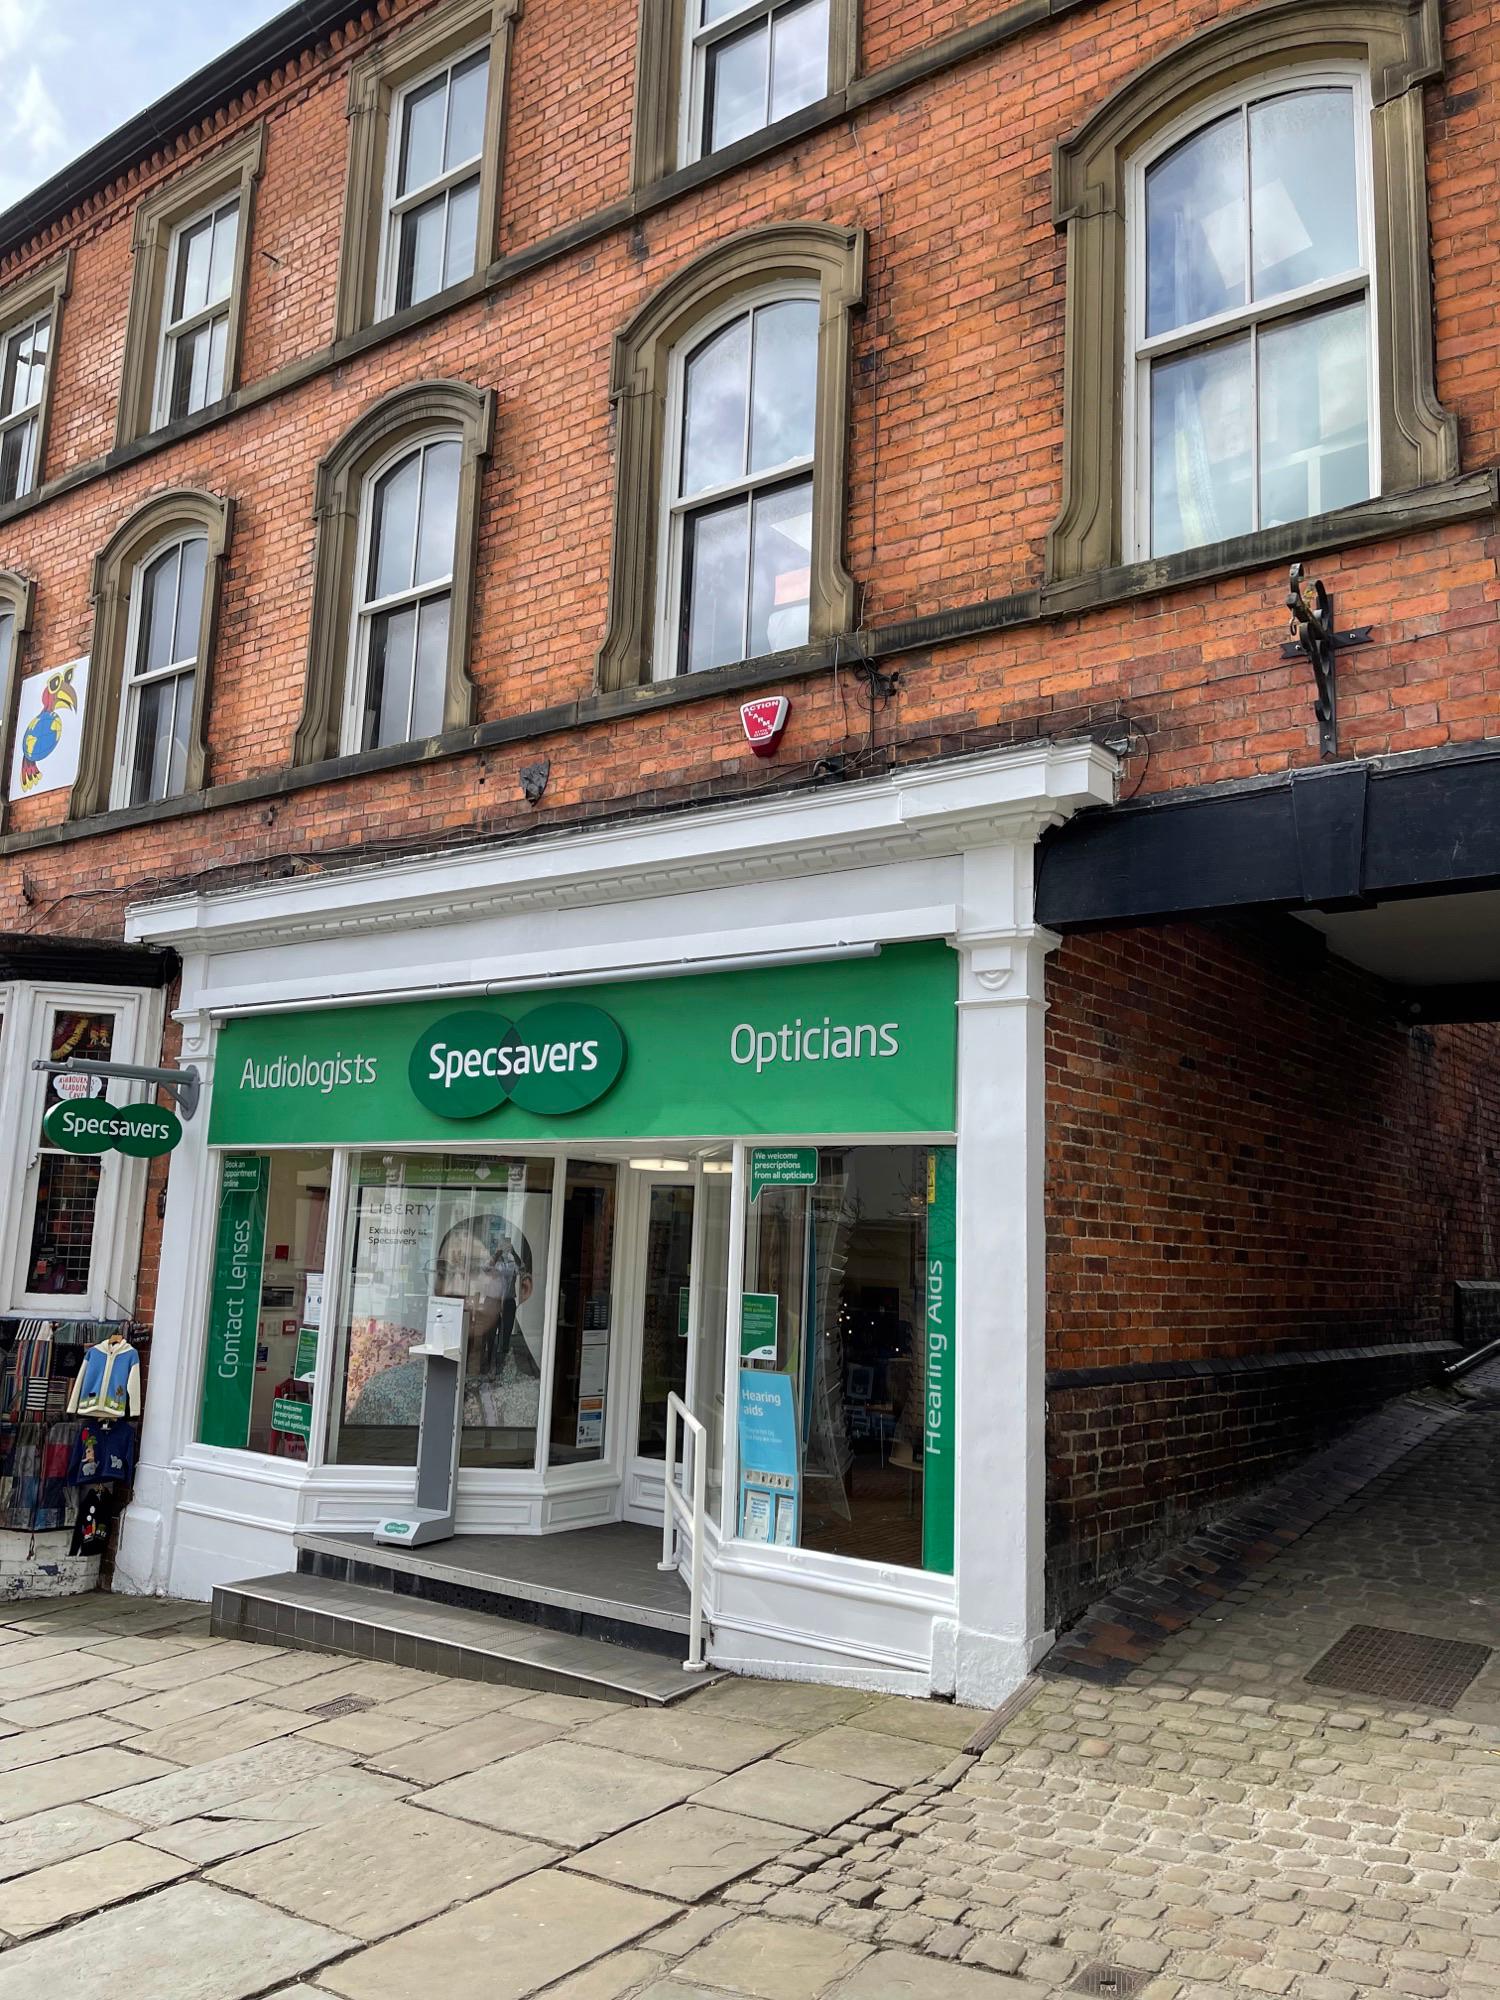 Images Specsavers Opticians and Audiologists - Ashbourne Derby